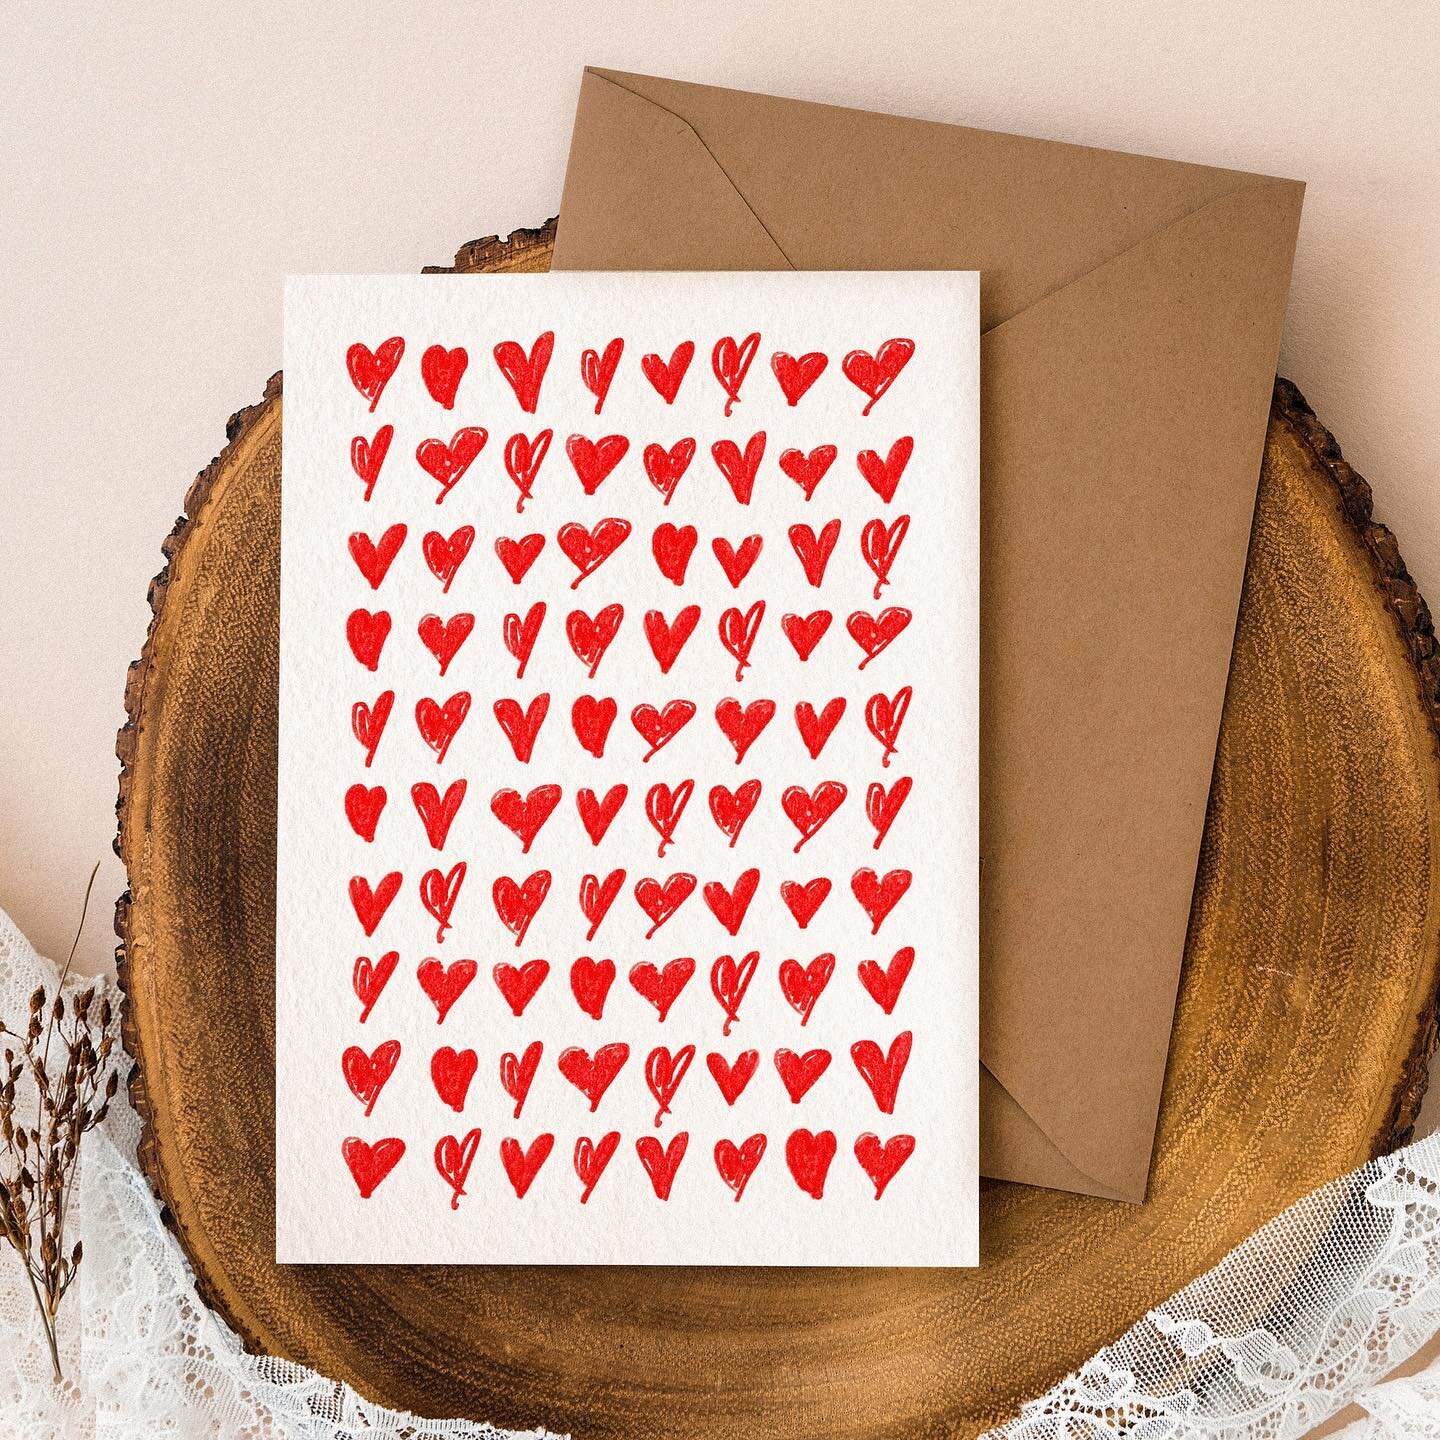 Valentine&rsquo;s Day? Galentine&rsquo;s Day? Palentine&rsquo;s Day?
Whichever you&rsquo;re celebrating, here&rsquo;s the perfect card to send to that special someone!
No frills, no cheese and no soppiness here! Just a whole lotta love(hearts) ❣️❣️❣️